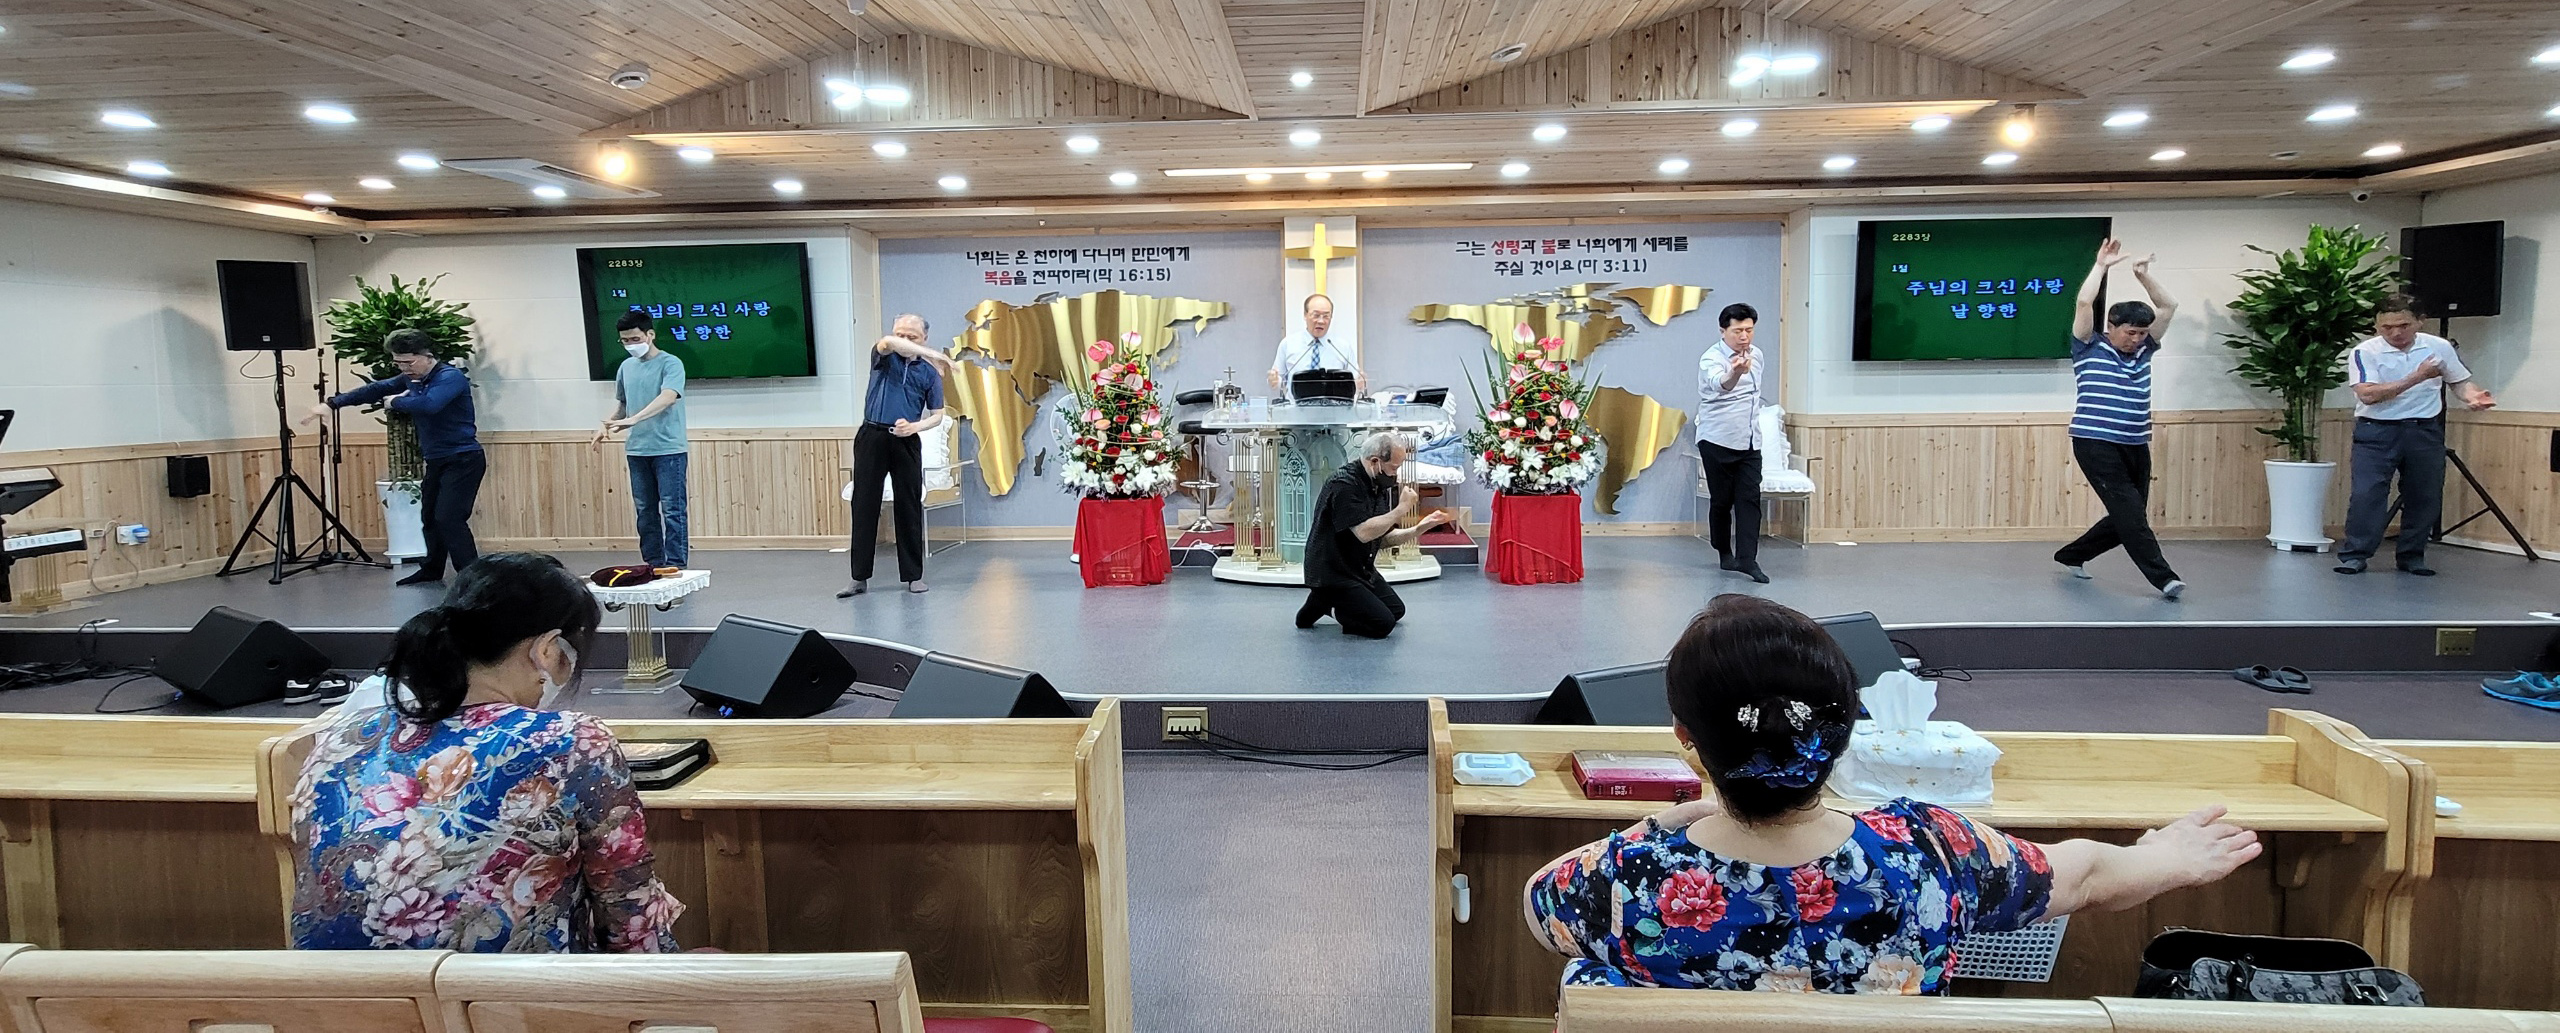 The men also dance before The Lord, as Pastor Yong Doo Kim is singing a song in Korean.